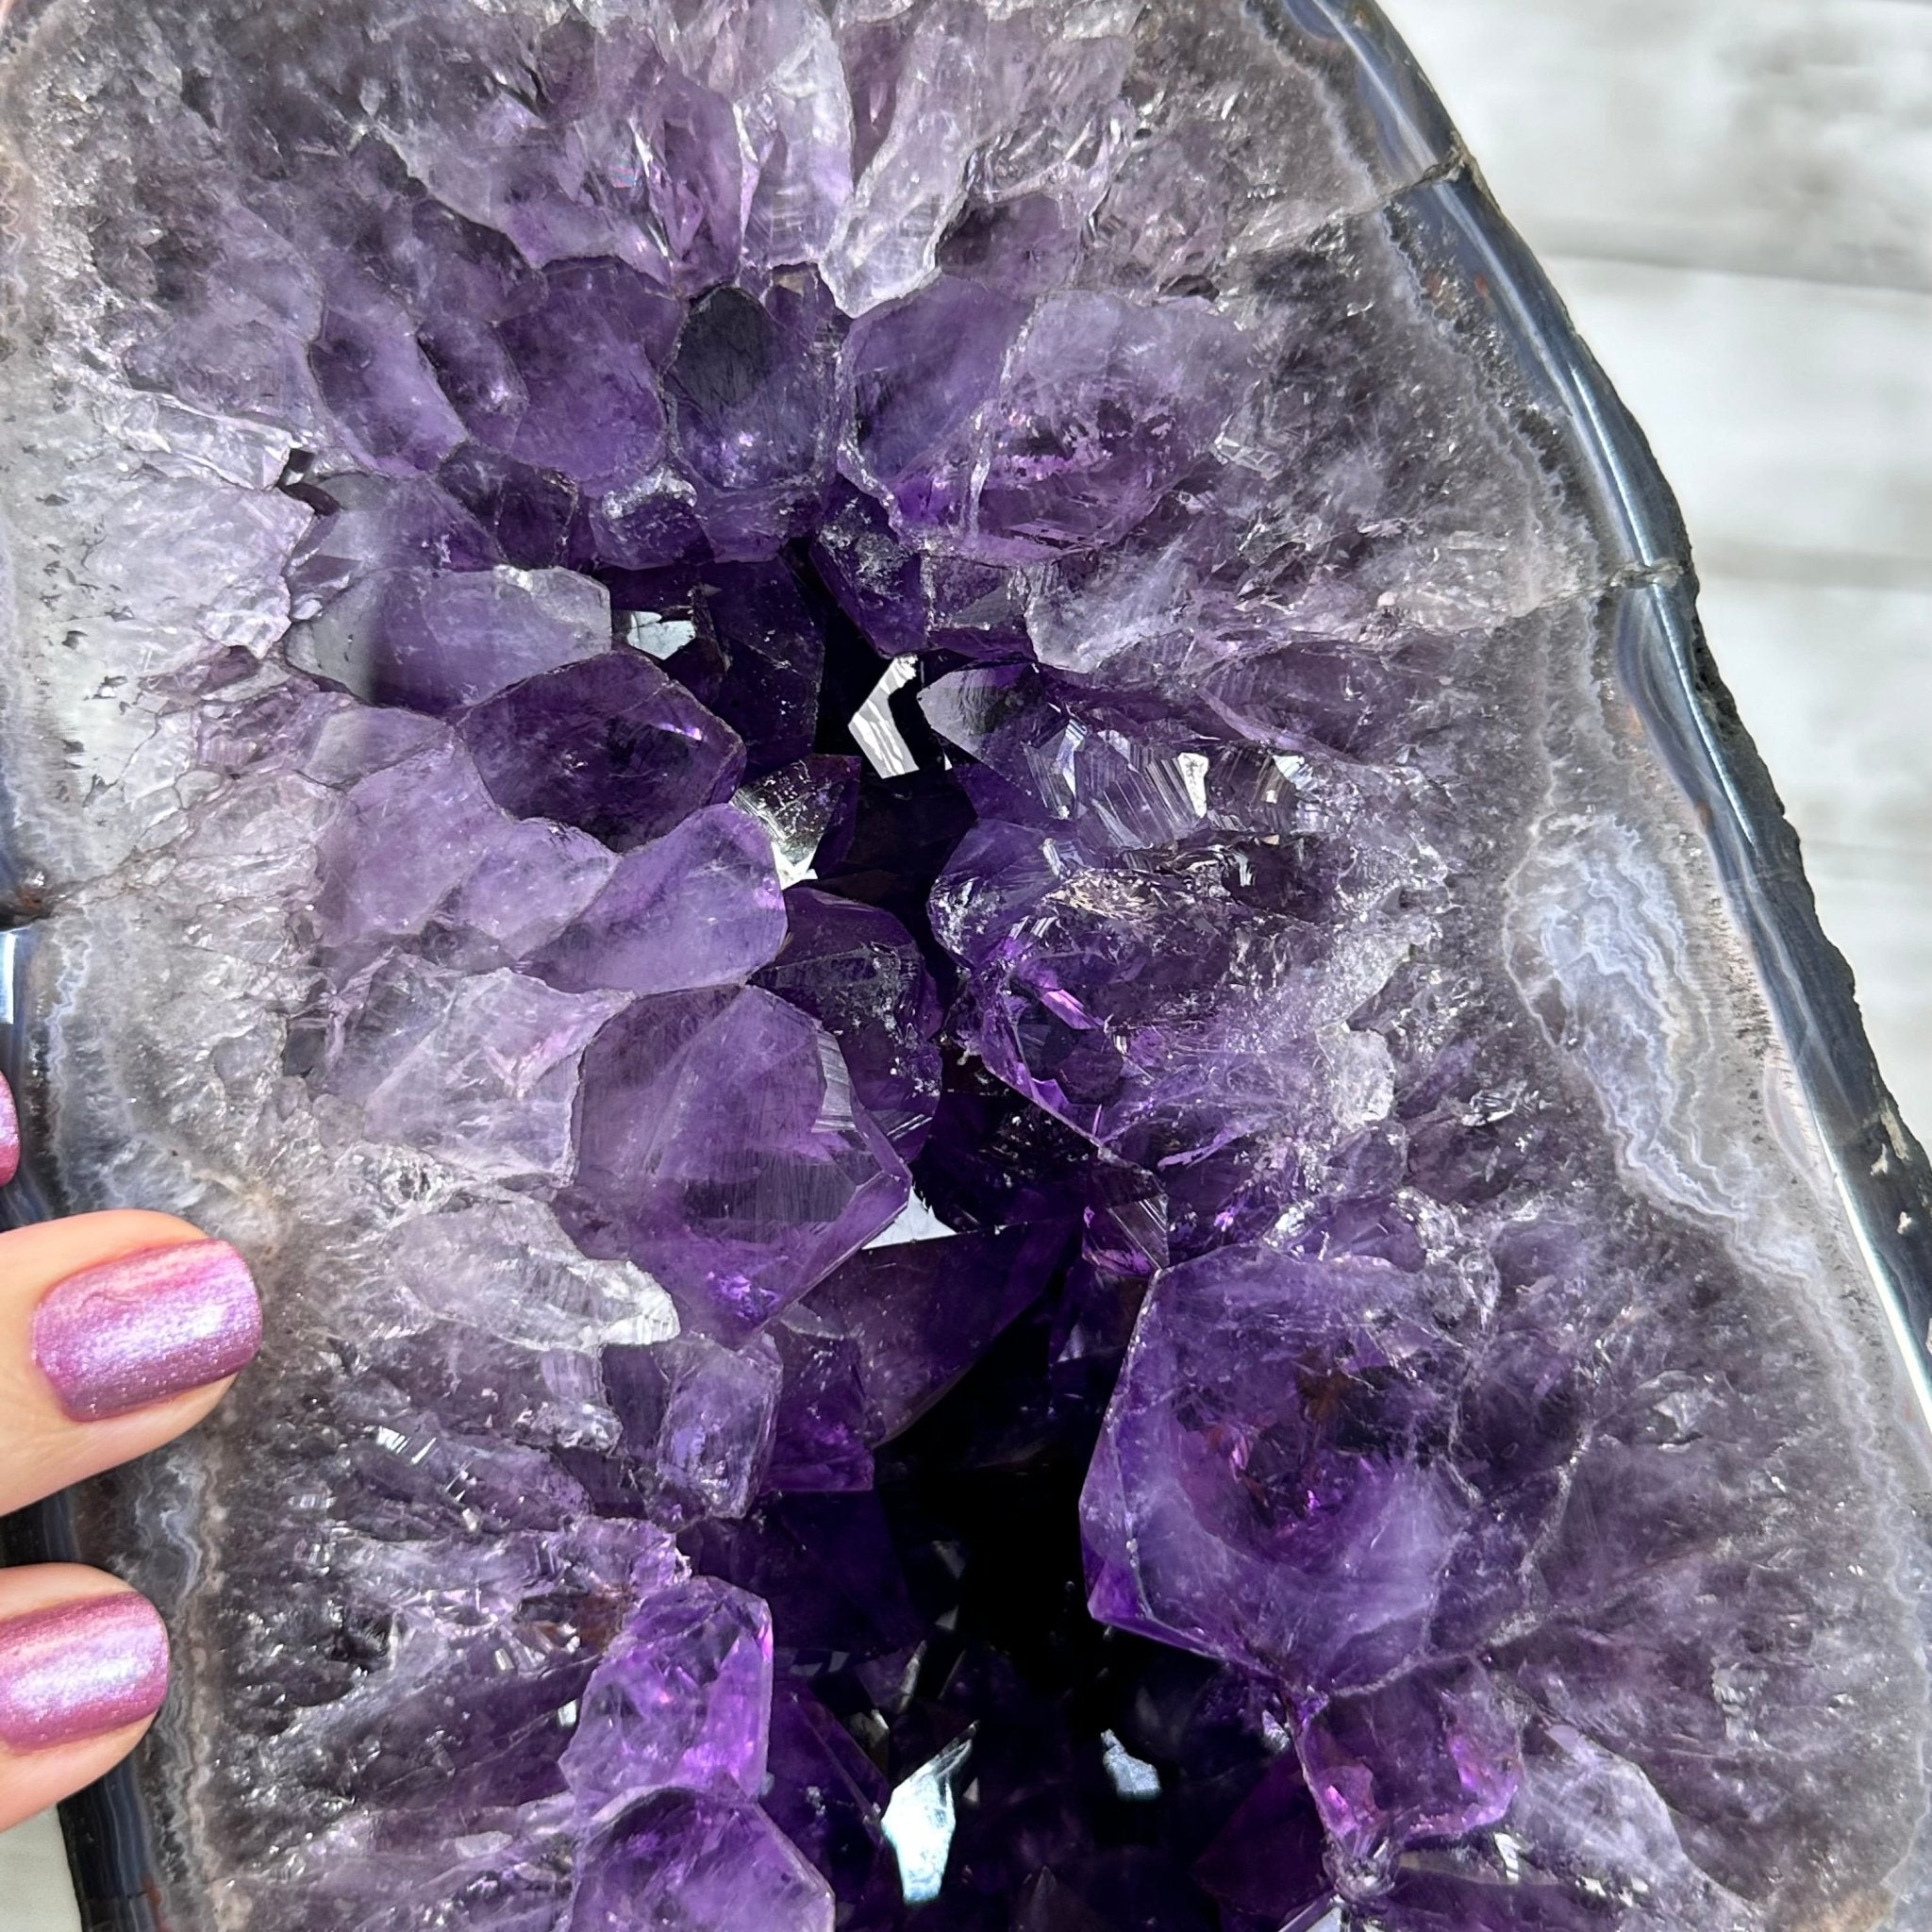 Super Quality Brazilian Amethyst Cathedral, 136 lbs & 37" Tall #5601-1303 - Brazil GemsBrazil GemsSuper Quality Brazilian Amethyst Cathedral, 136 lbs & 37" Tall #5601-1303Cathedrals5601-1303